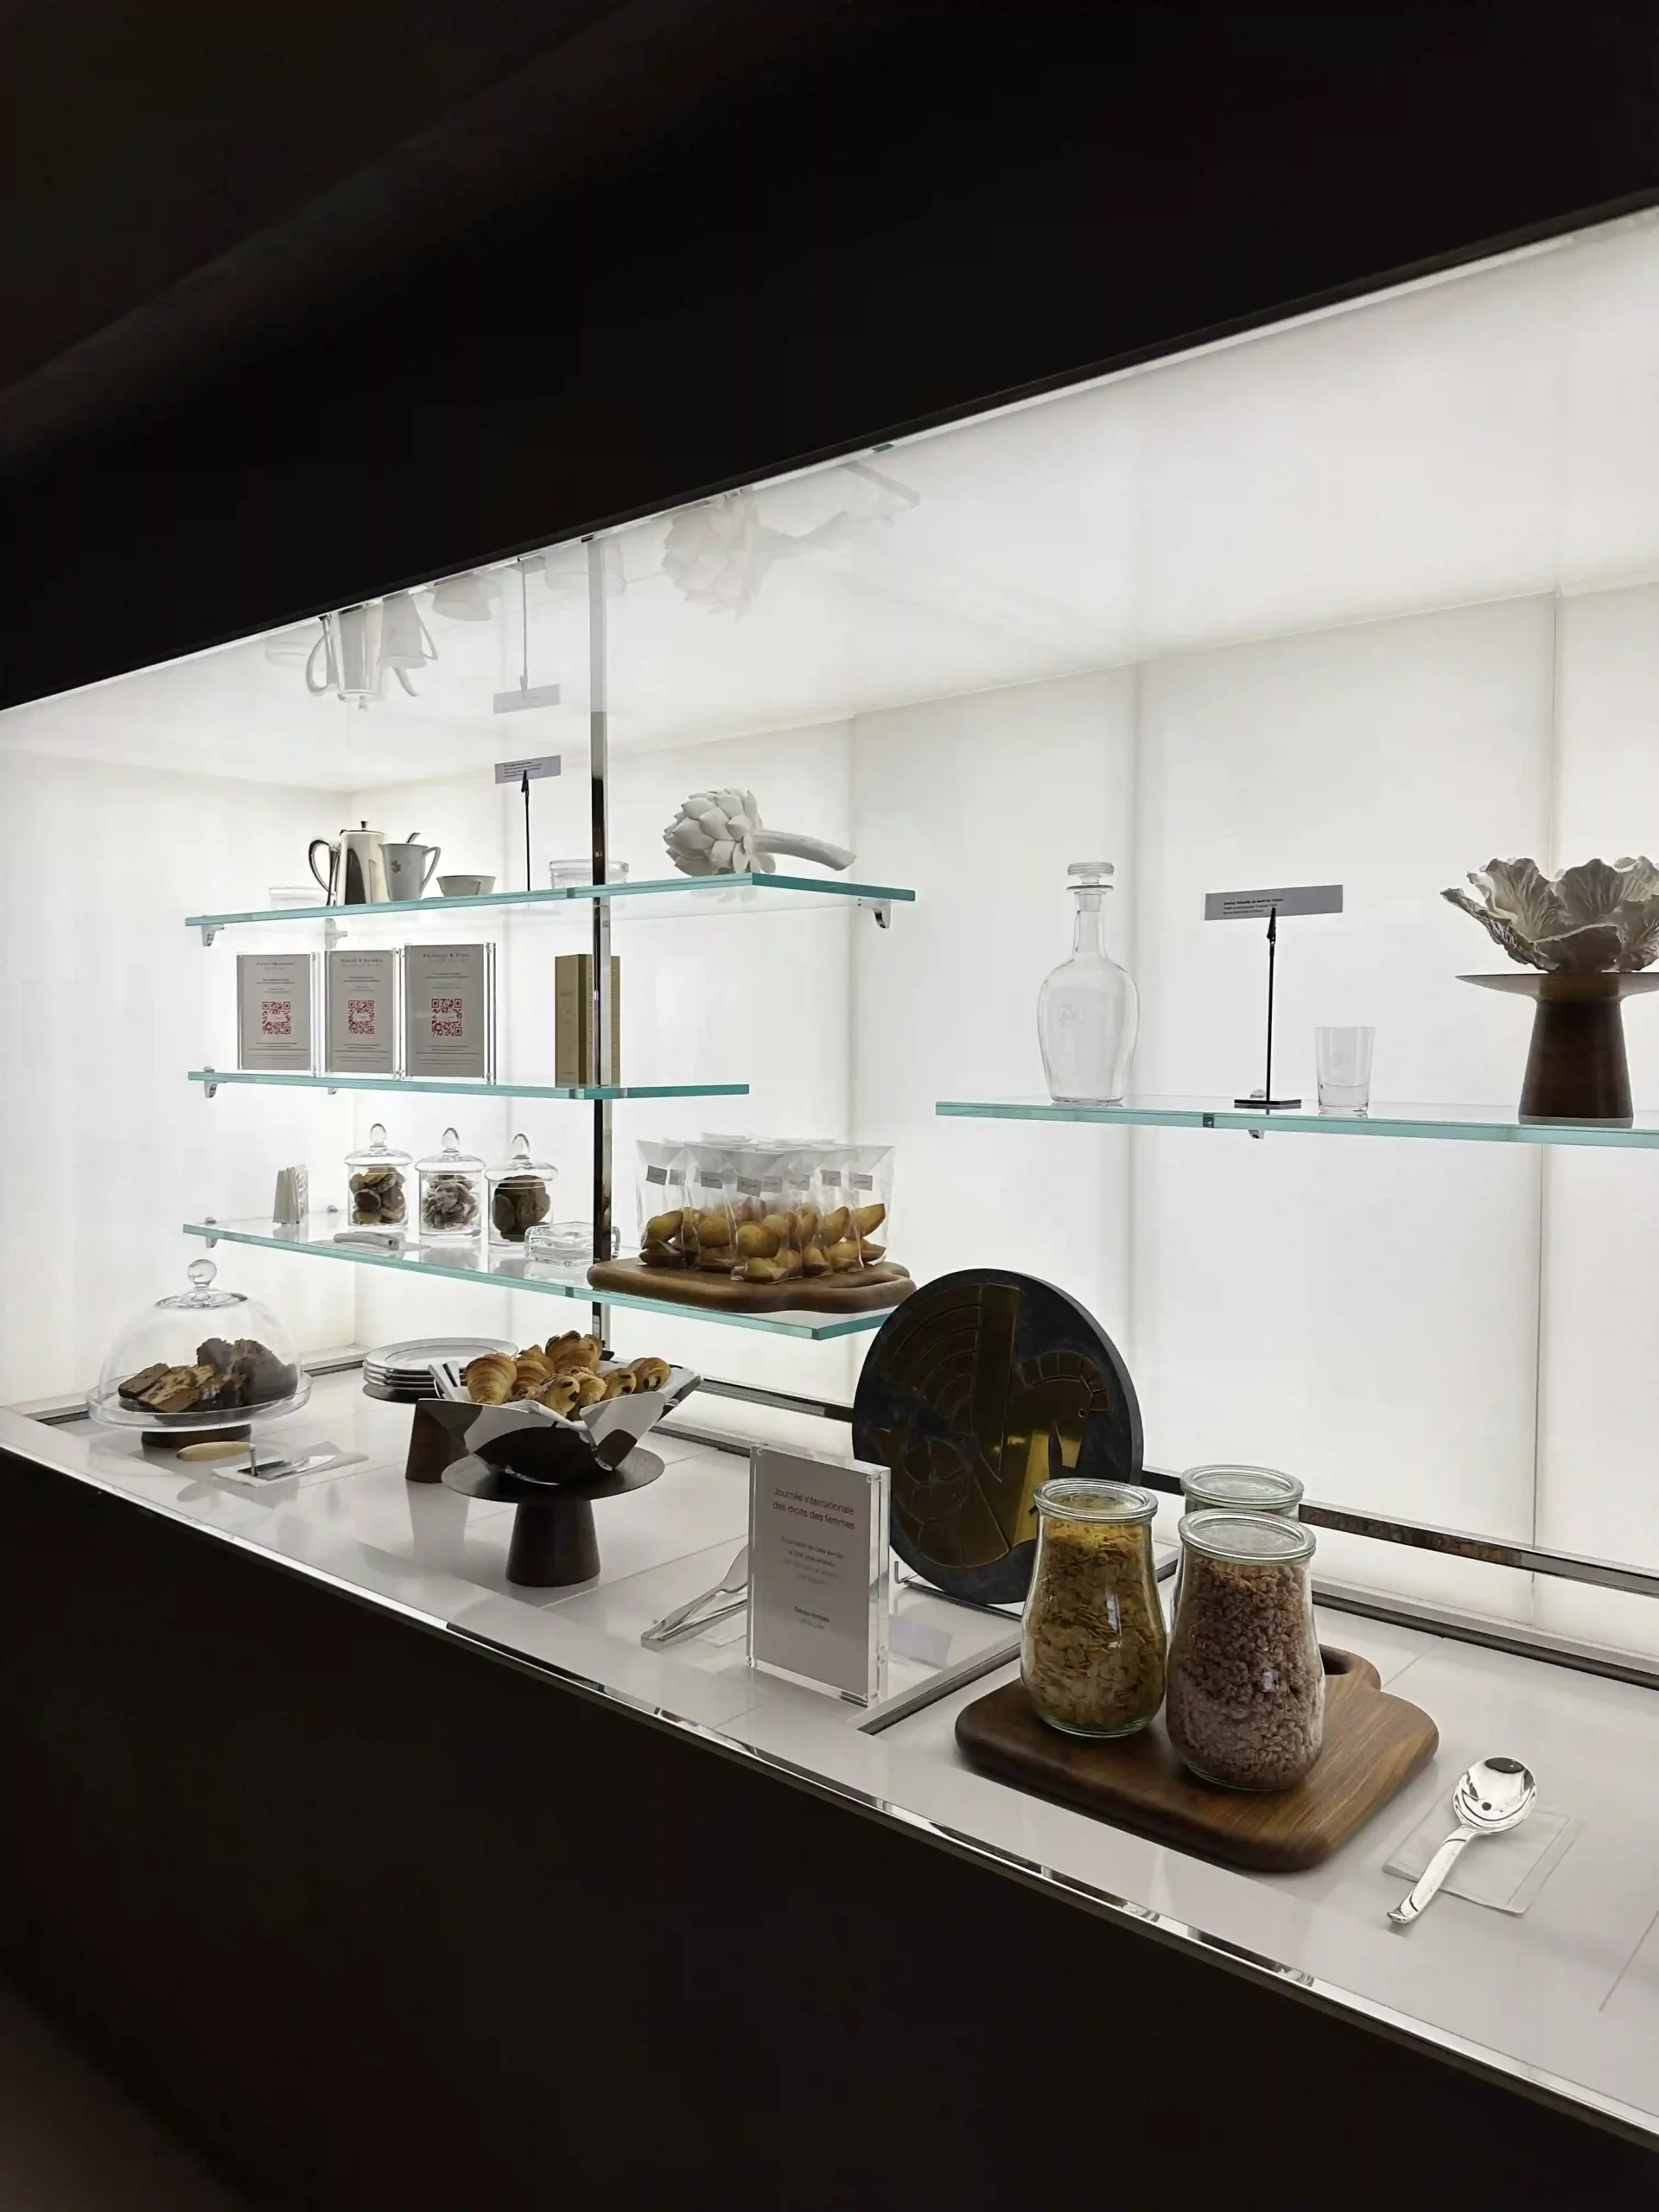 a display case with glass shelves and food items